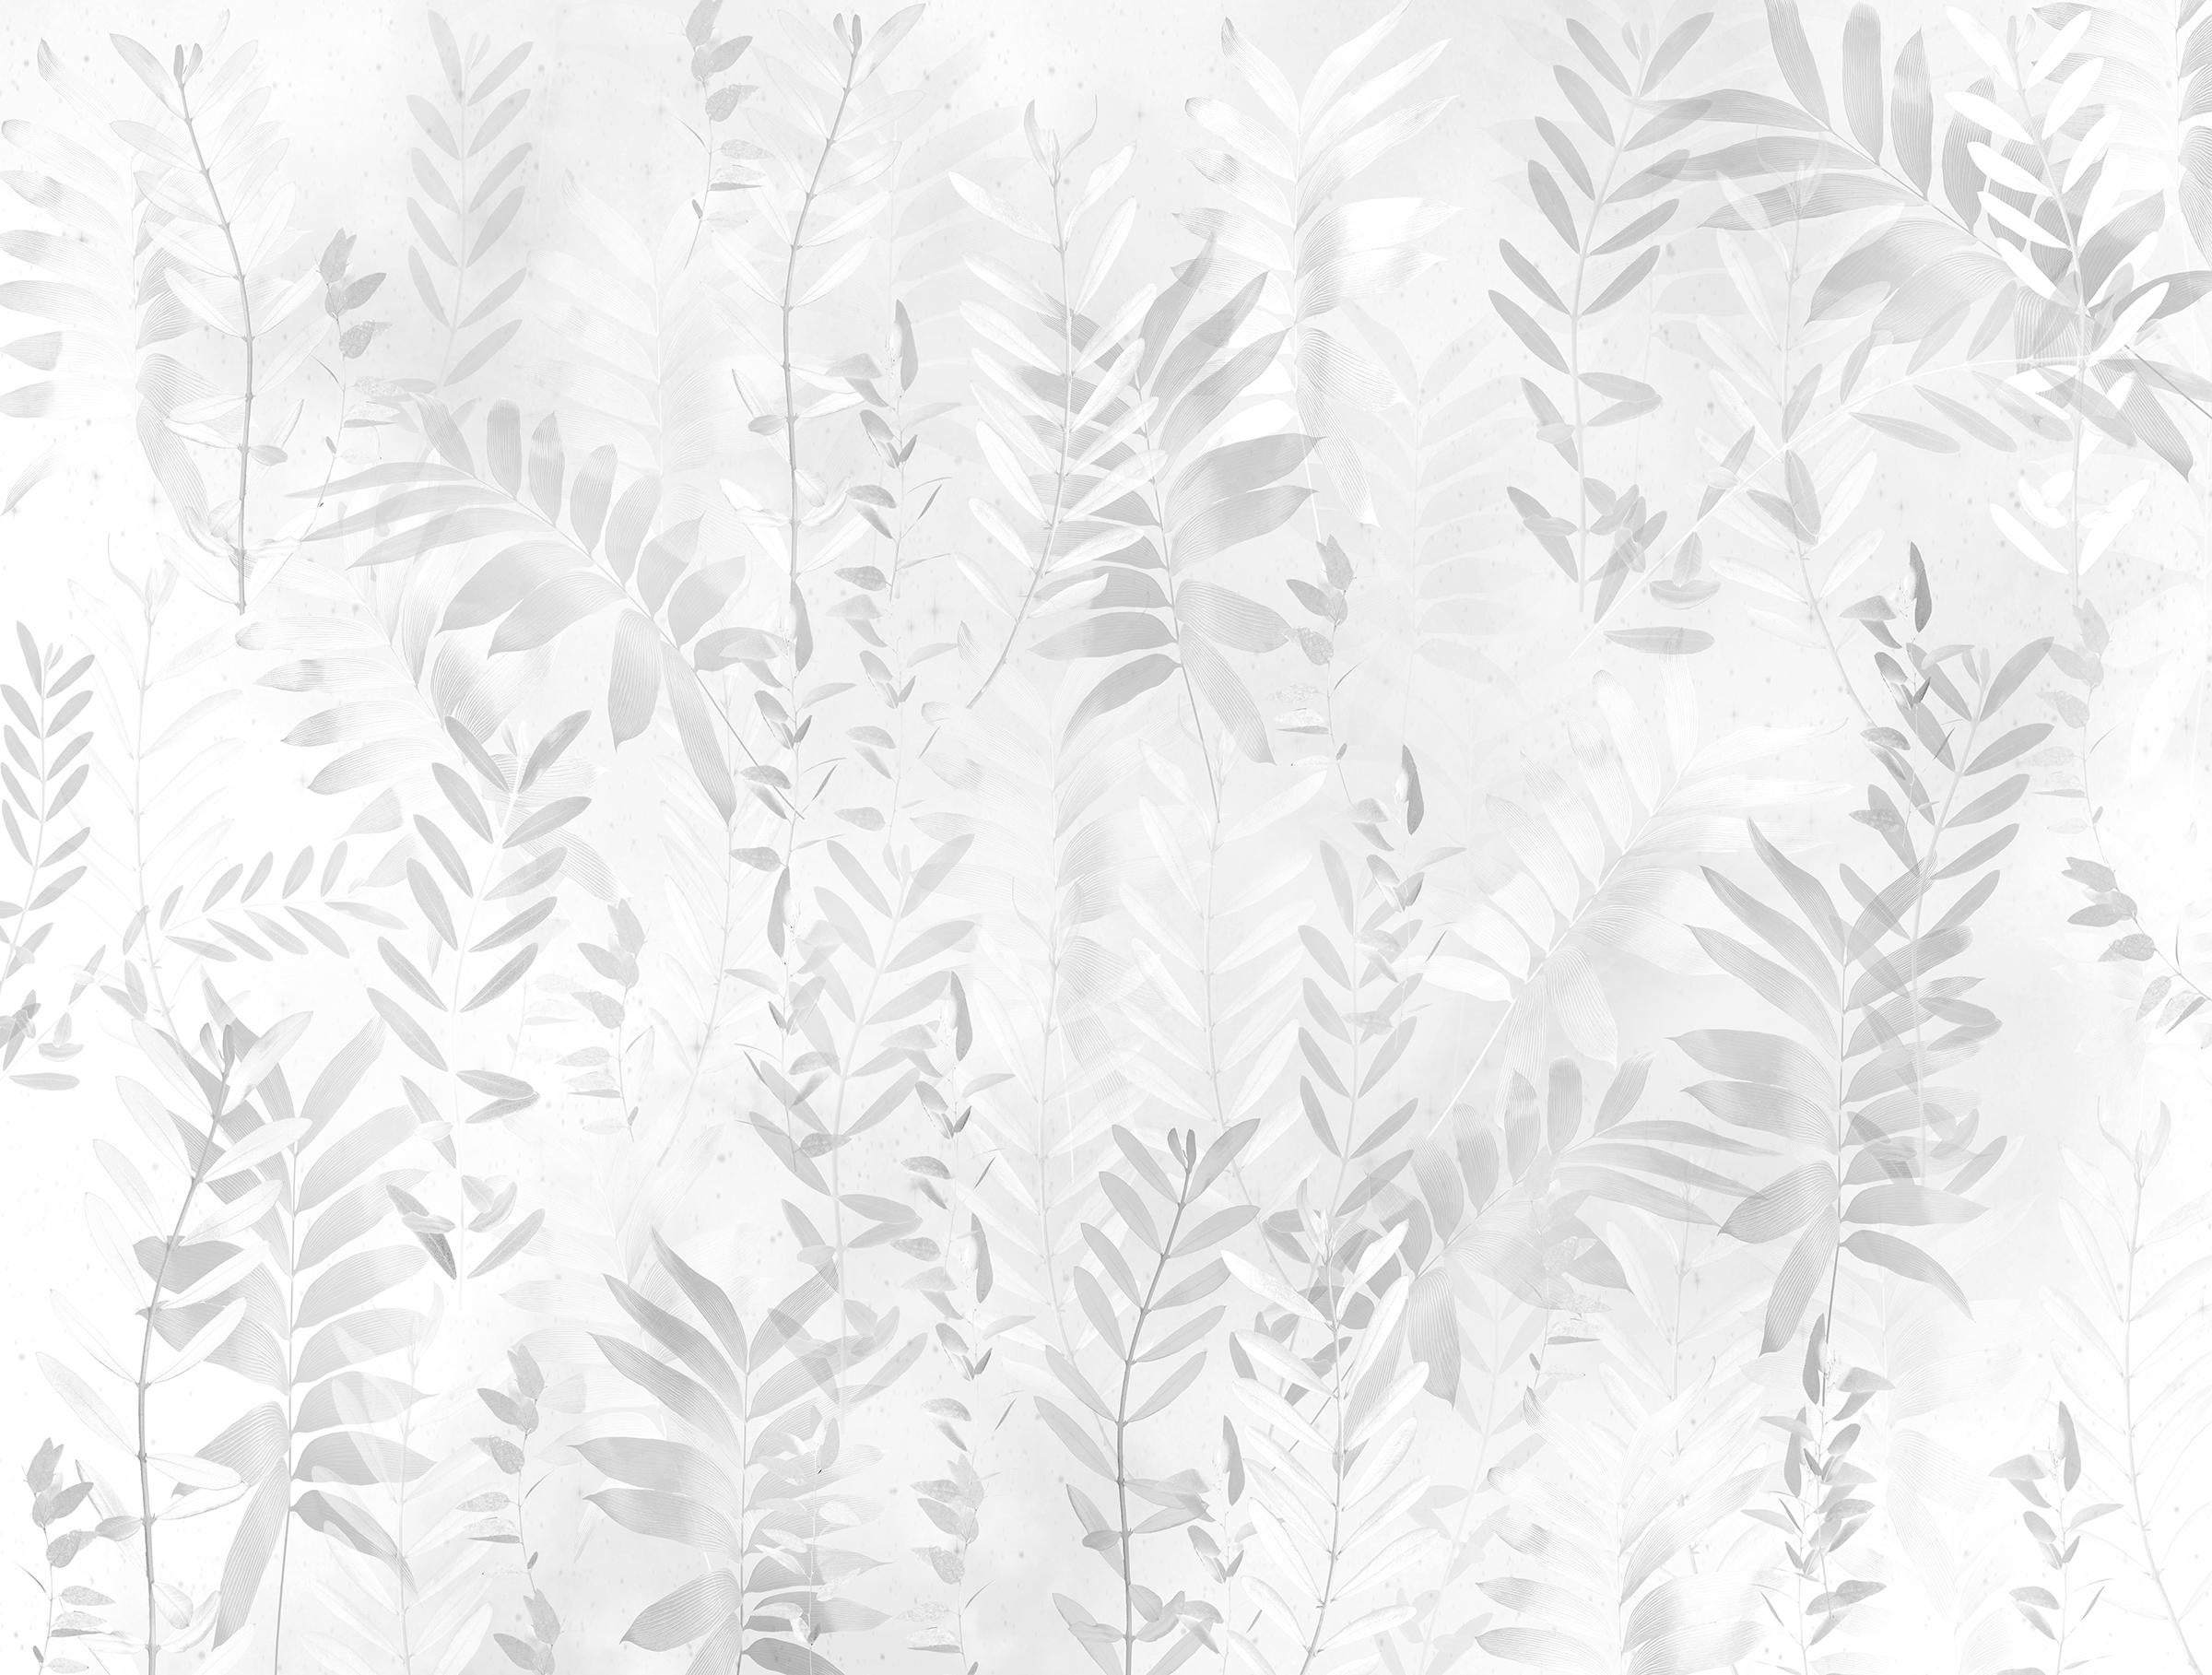 Collections EDGE - Impression murale Ferngully Evergreen en vente 3